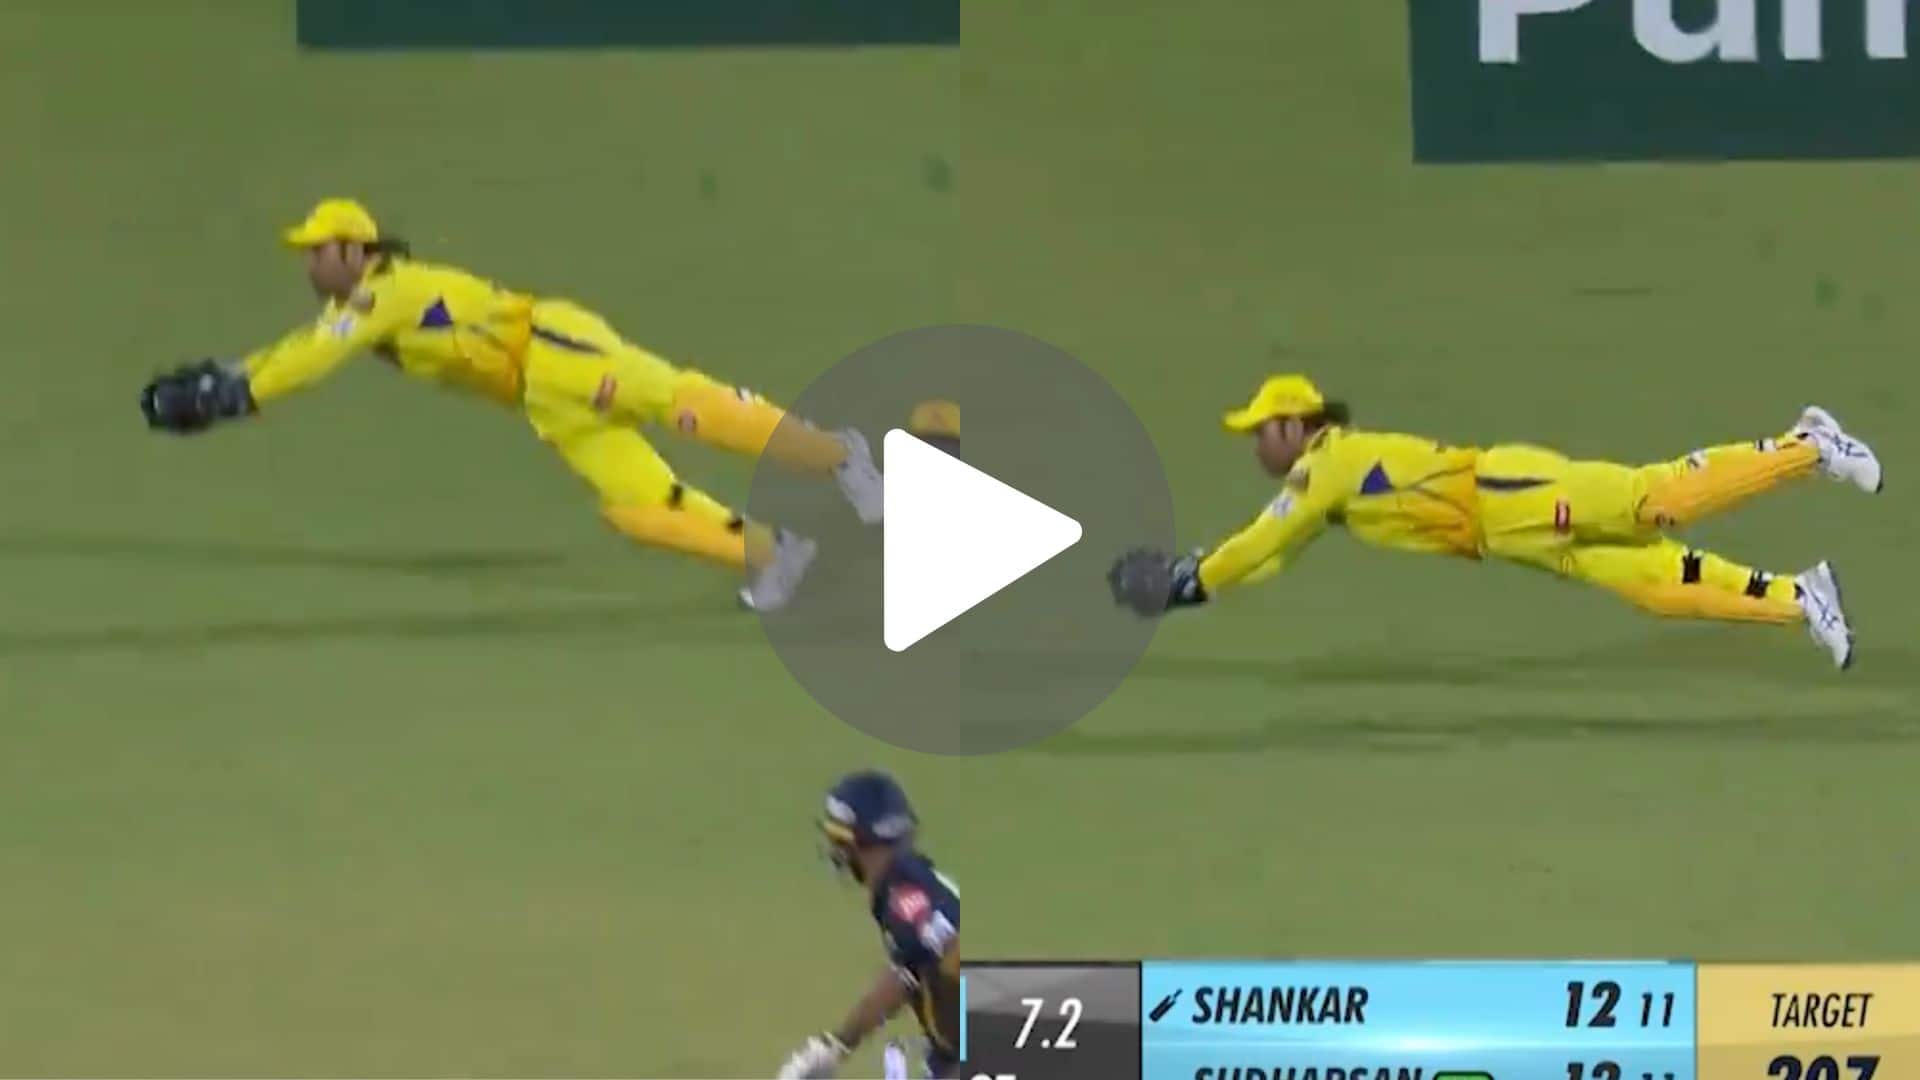 [Watch] Ageless MS Dhoni Pulls Off An 'Insane Flying Catch' To Make Chepauk Go Wild